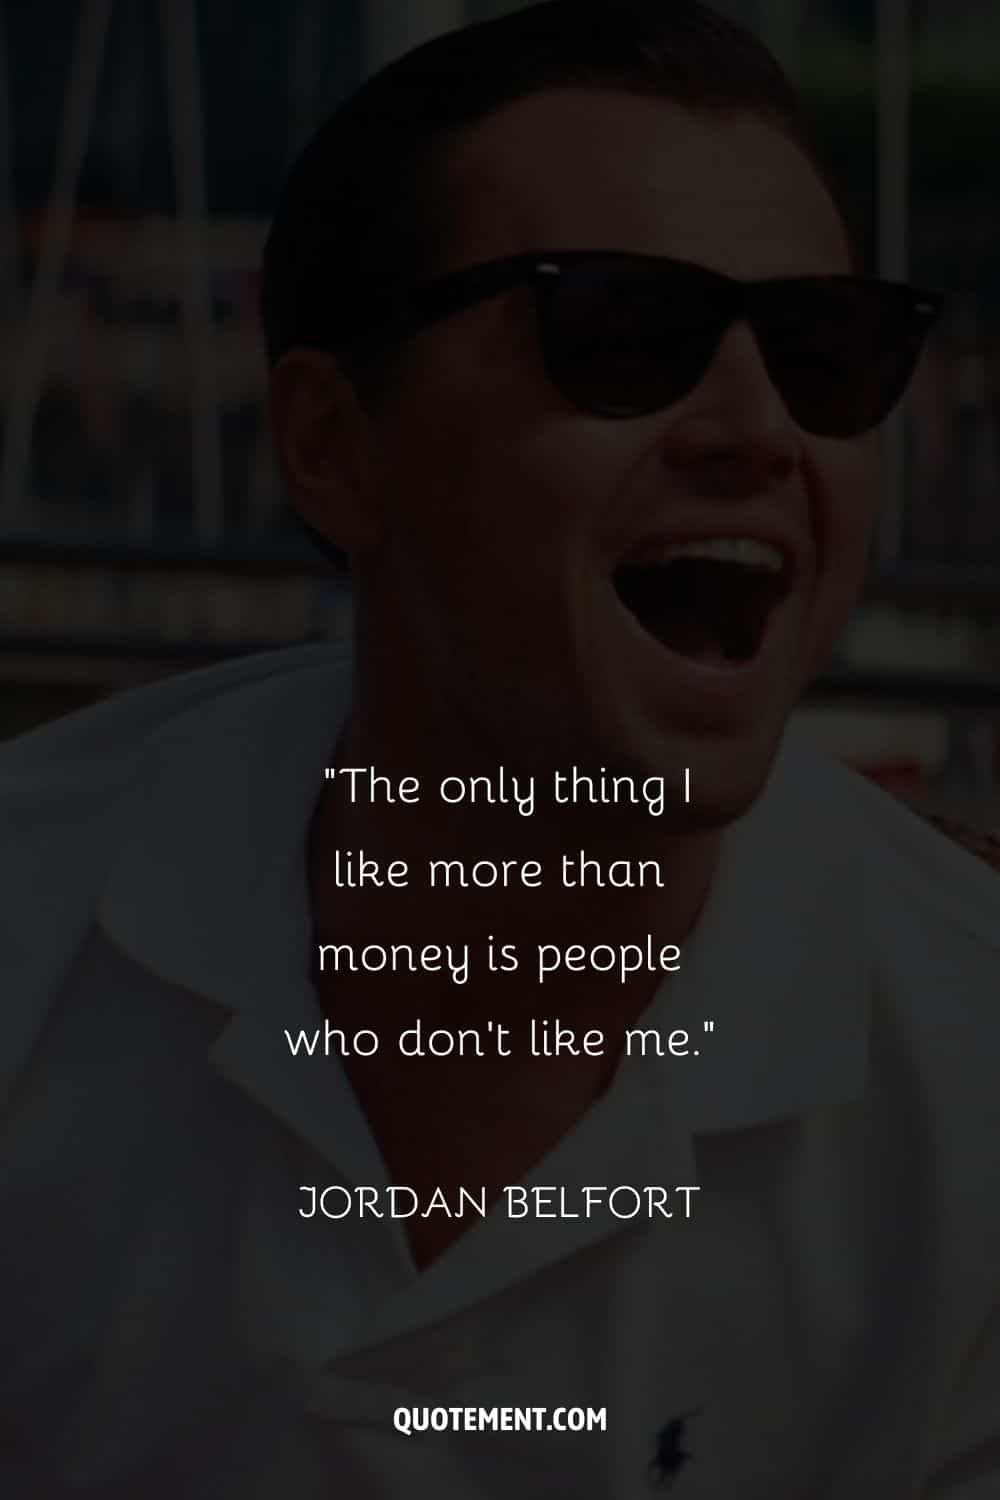 Leonardo DiCaprio laughing representing wolf of wall street quote funny
